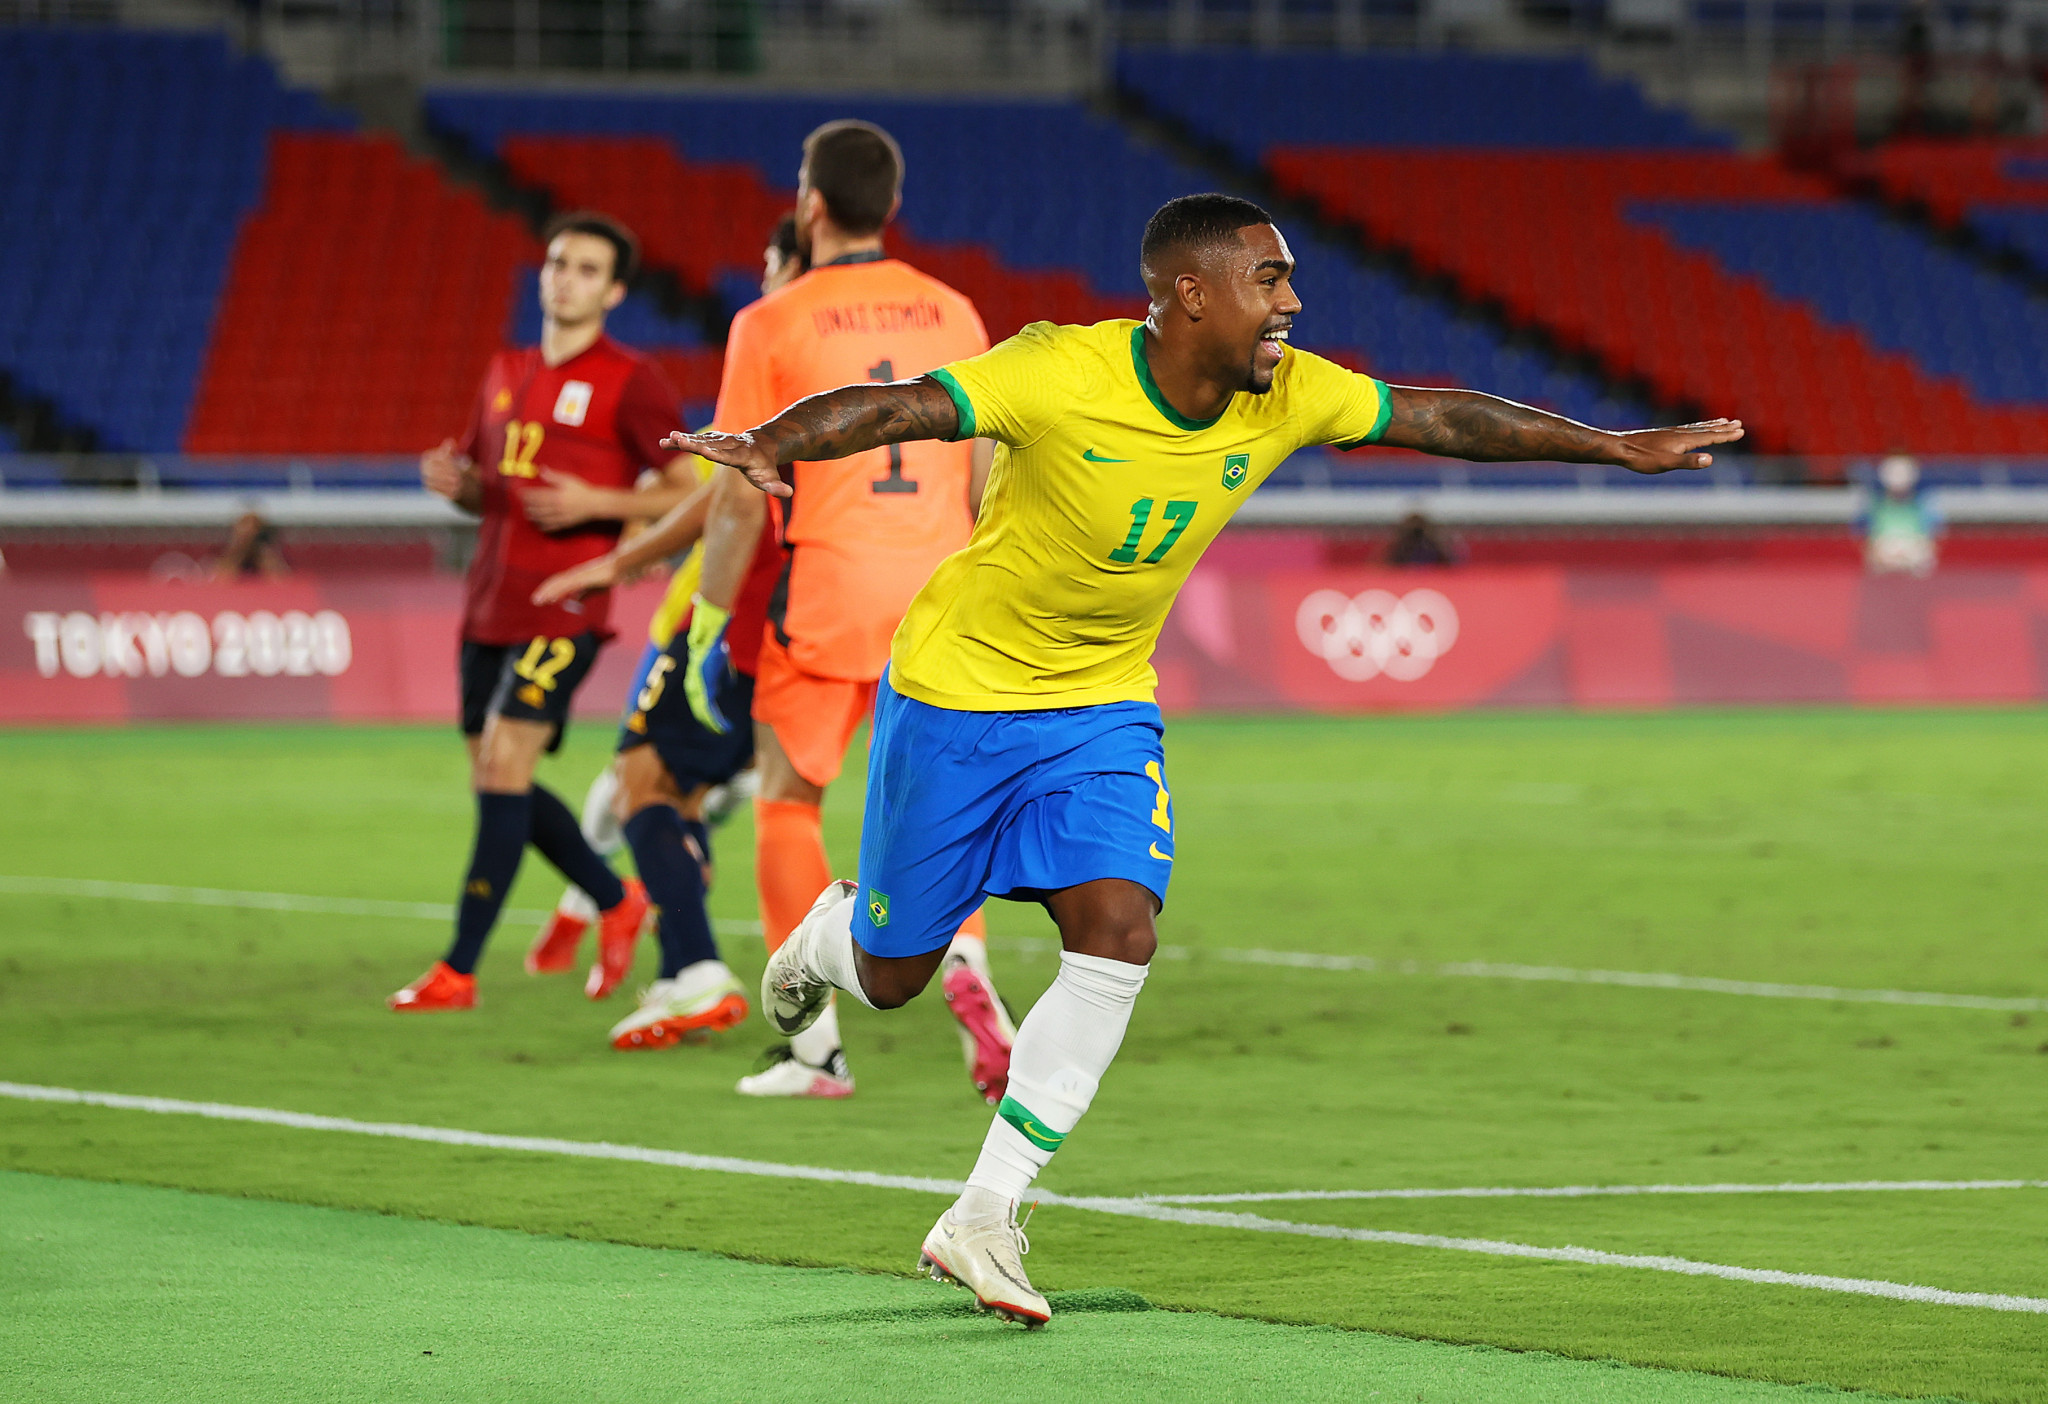 An extra time goal from Malcom gave Brazil Olympic gold ©Getty Images